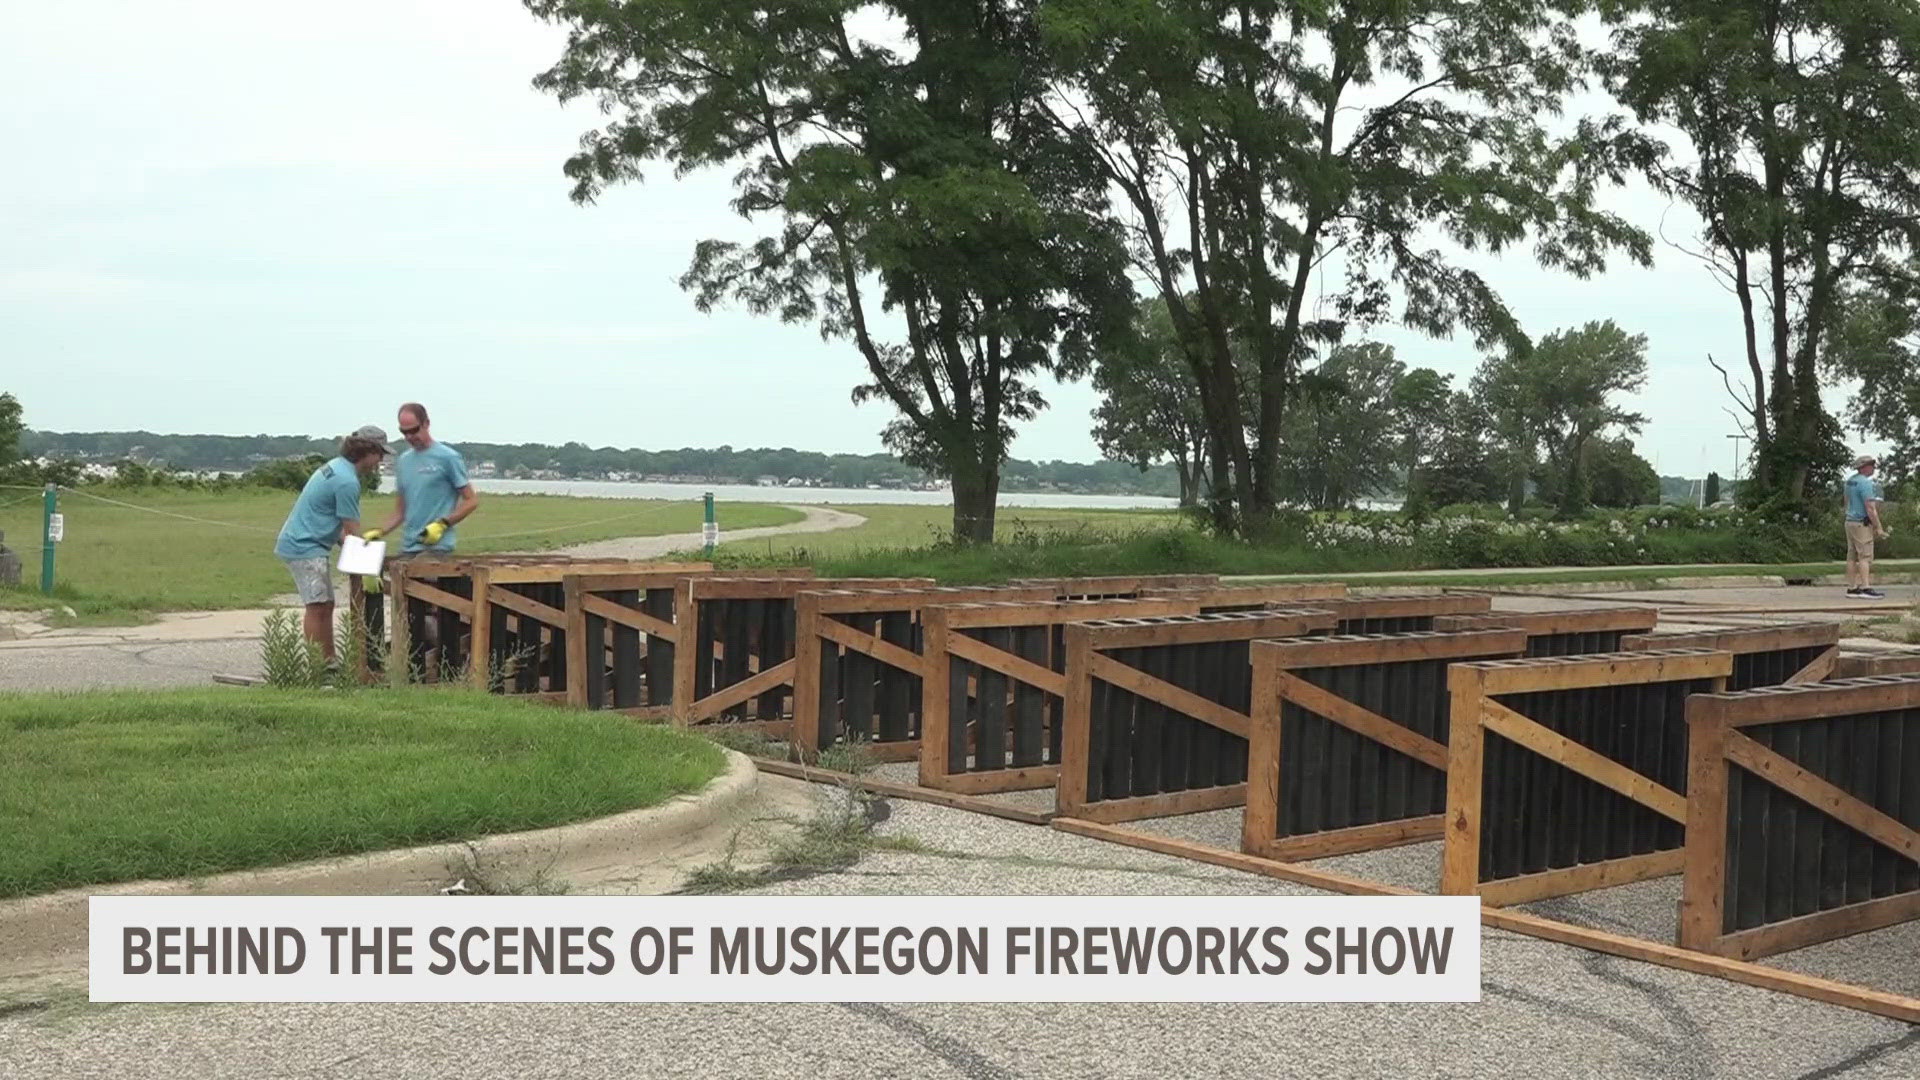 The annual Fourth of July firework show in Muskegon has been crafted and designed specifically for the lakeshore city.